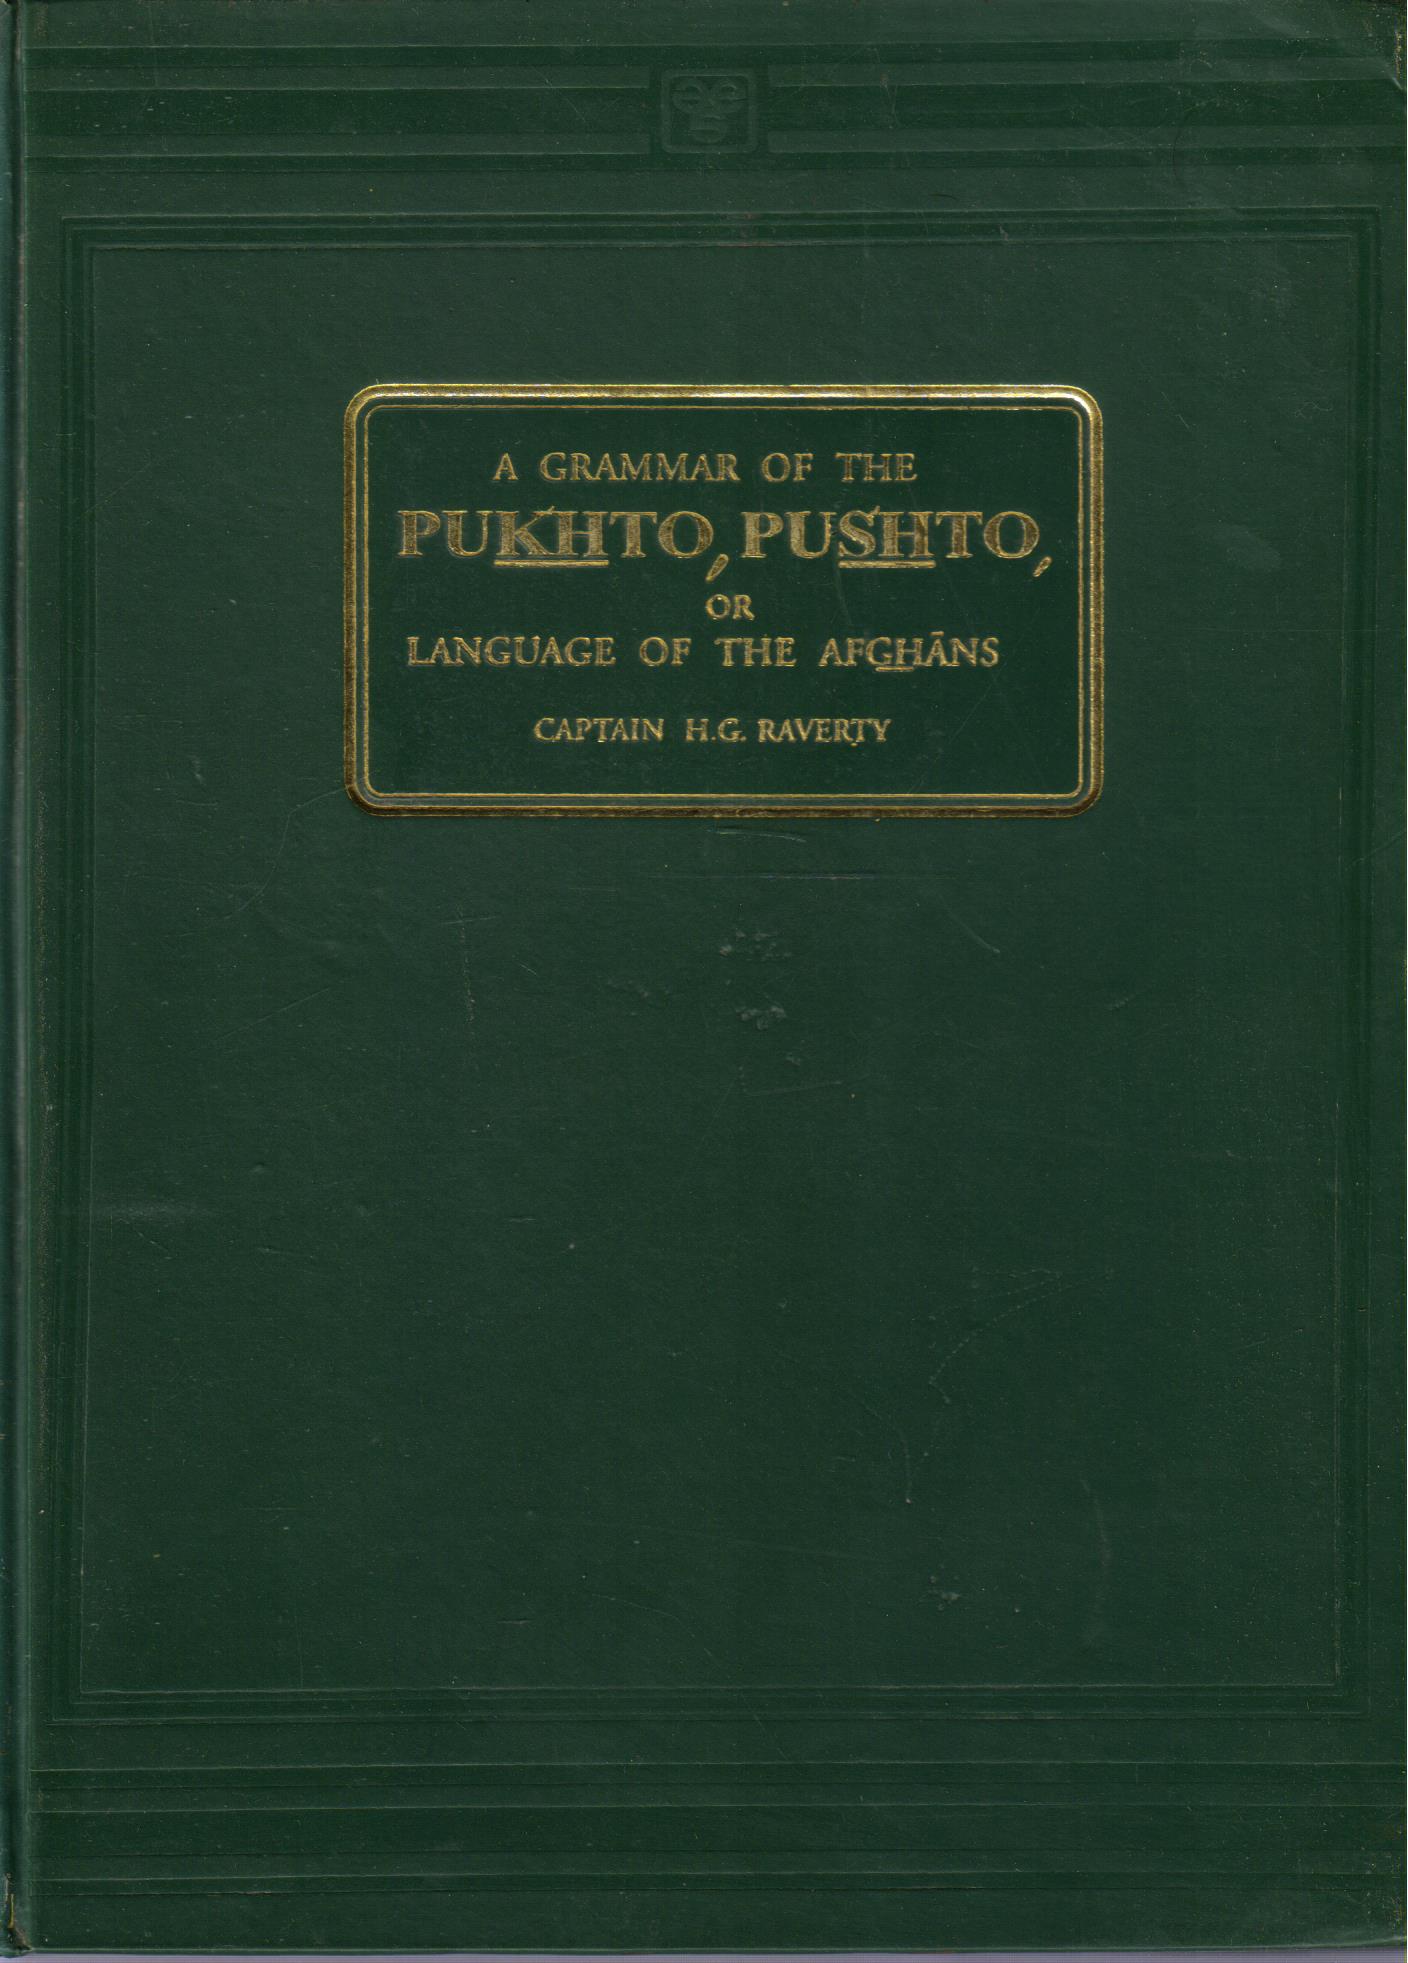 A Grammar of the Pukhto,Pushto or Language of the Afghans